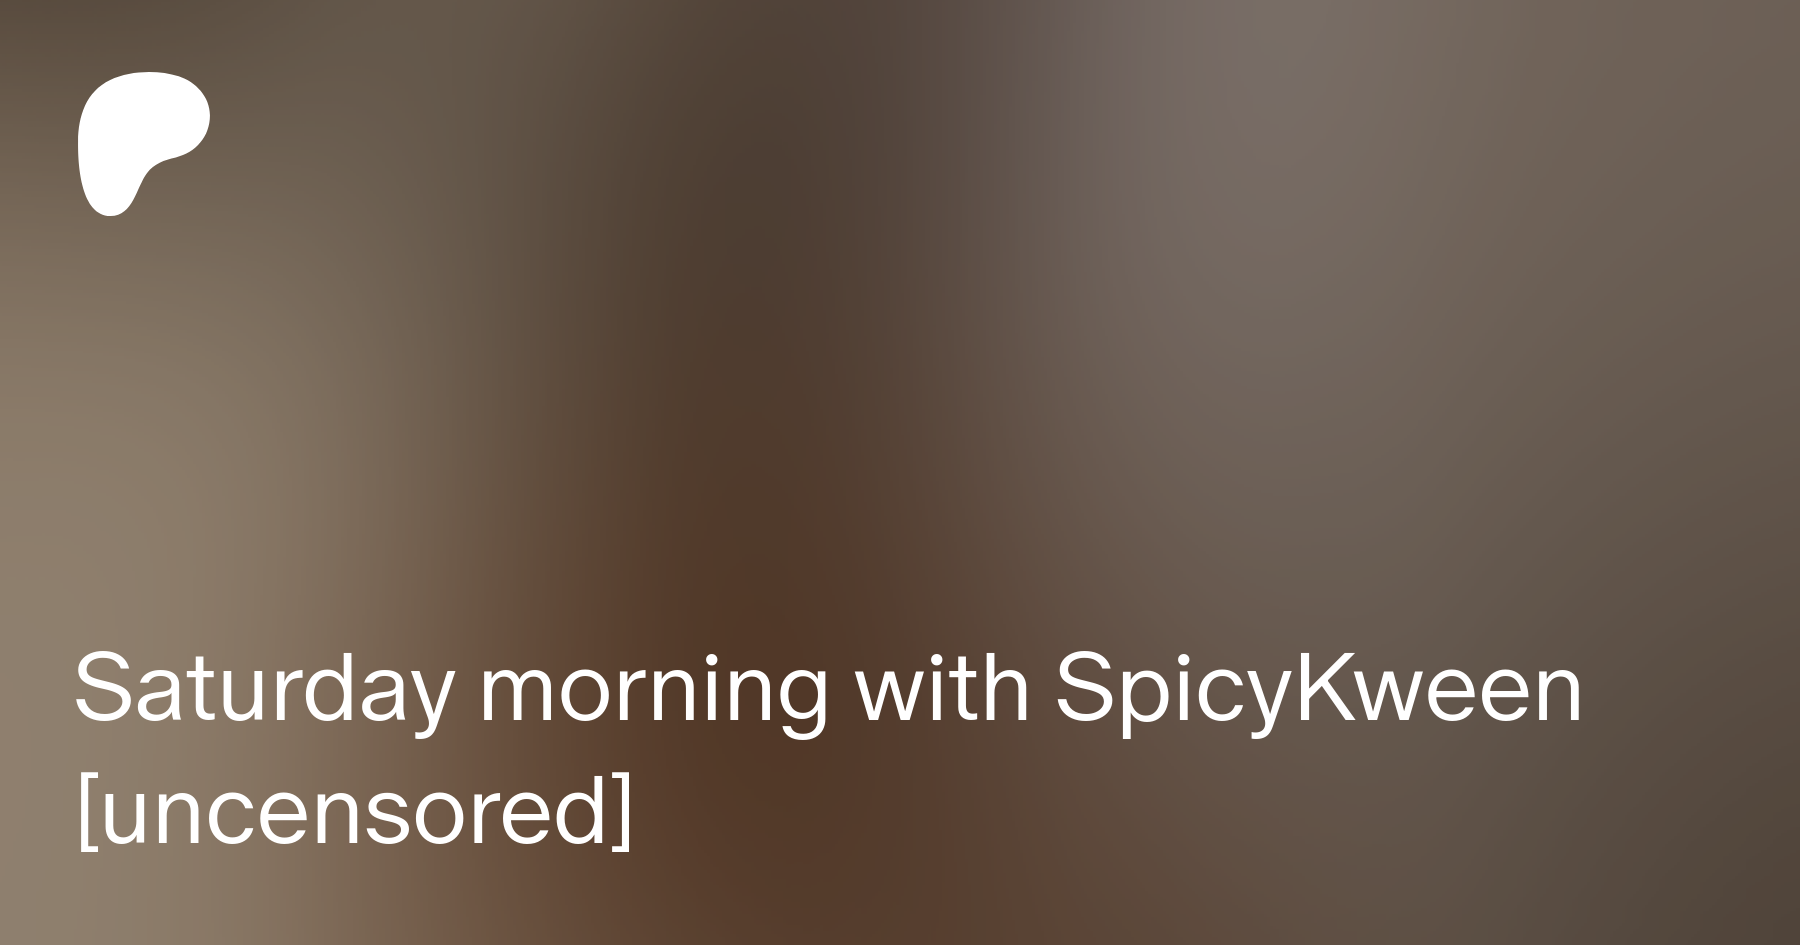 Saturday morning with SpicyKween [uncensored] | Patreon